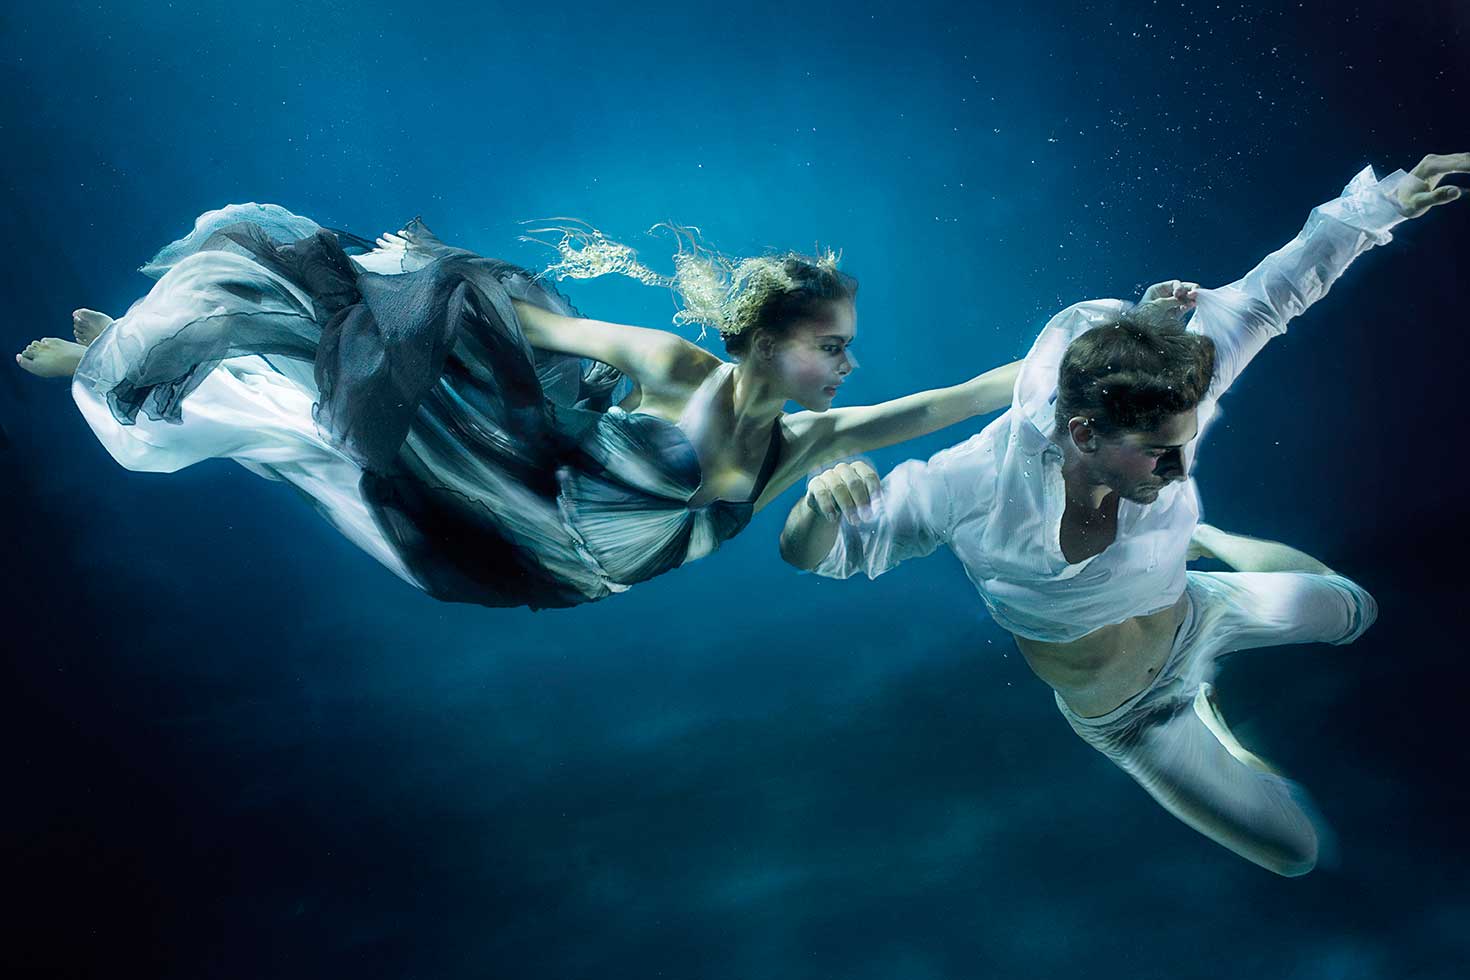 Truly, Madly, Deeply. Siren and Sailor drift in Haute Couture beneath the blue water and amongst shipwrecks. Styled by Damian Foxe. Copyright 2016 - Zena Holloway